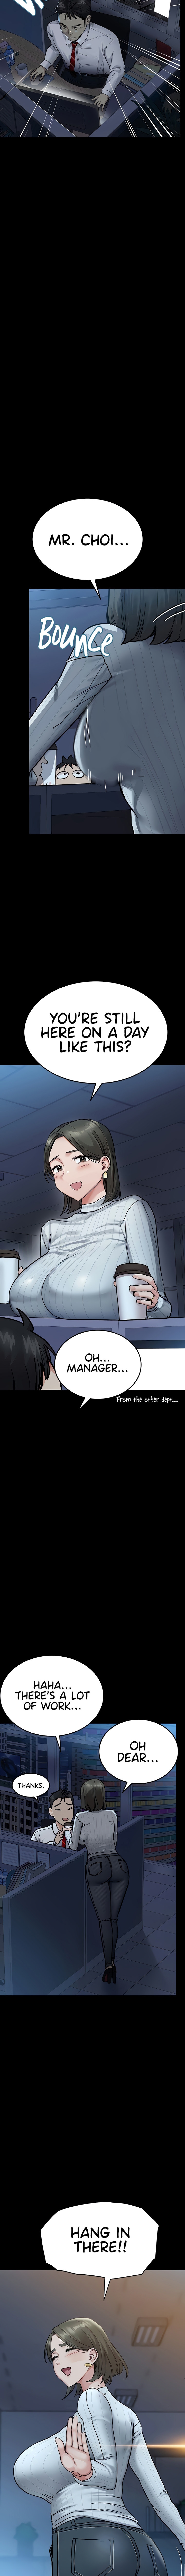 The Story of How I Got Together With The Manager On Christmas Chapter 0 - Page 3